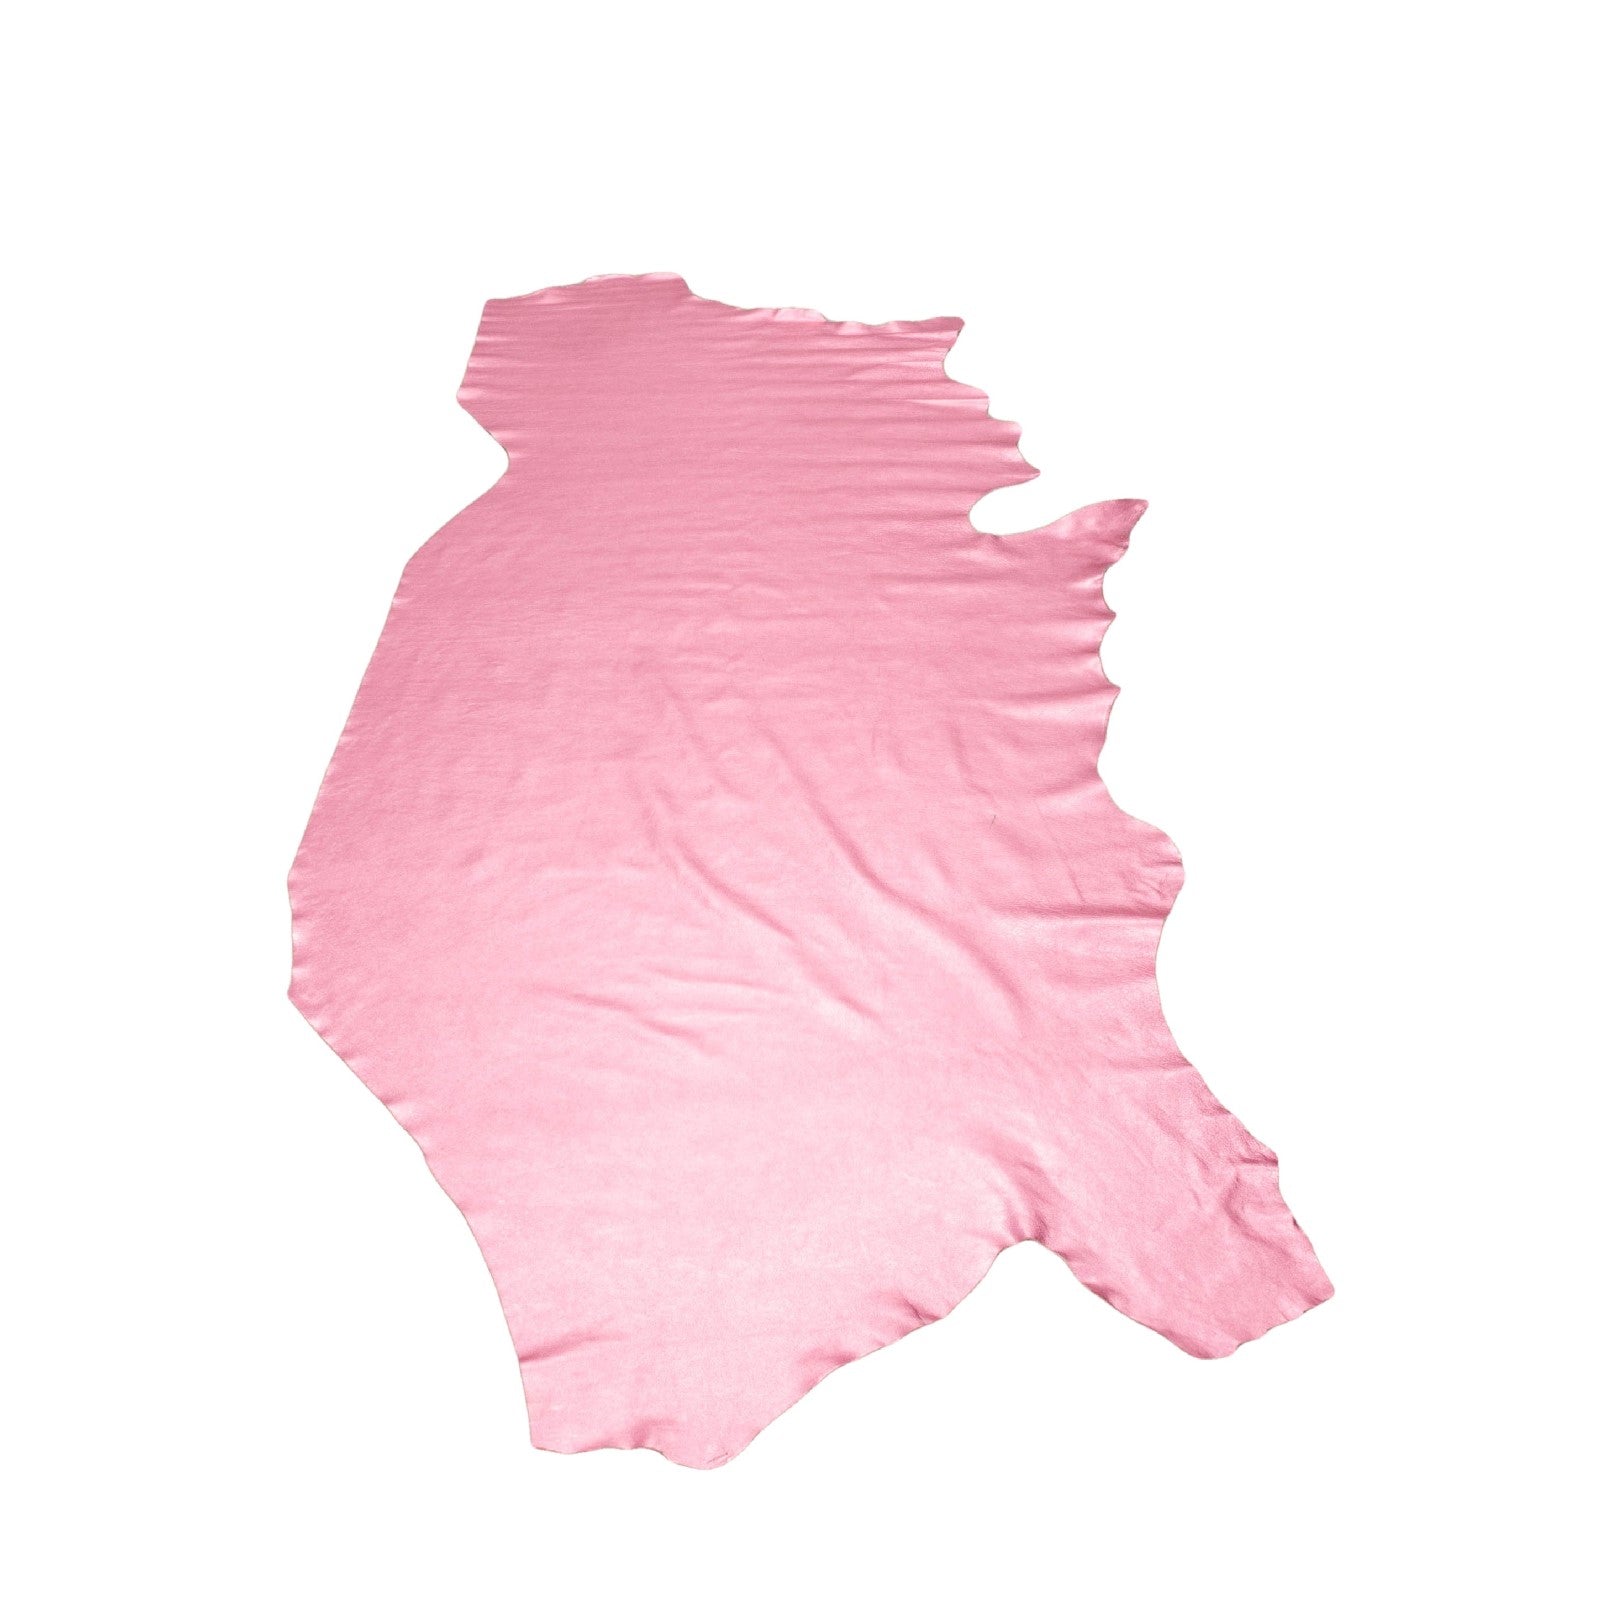 Party Girl Pink, 2-3 oz Cow Hides, Metallic Vegas, 18-20 Sq Ft / Side | The Leather Guy